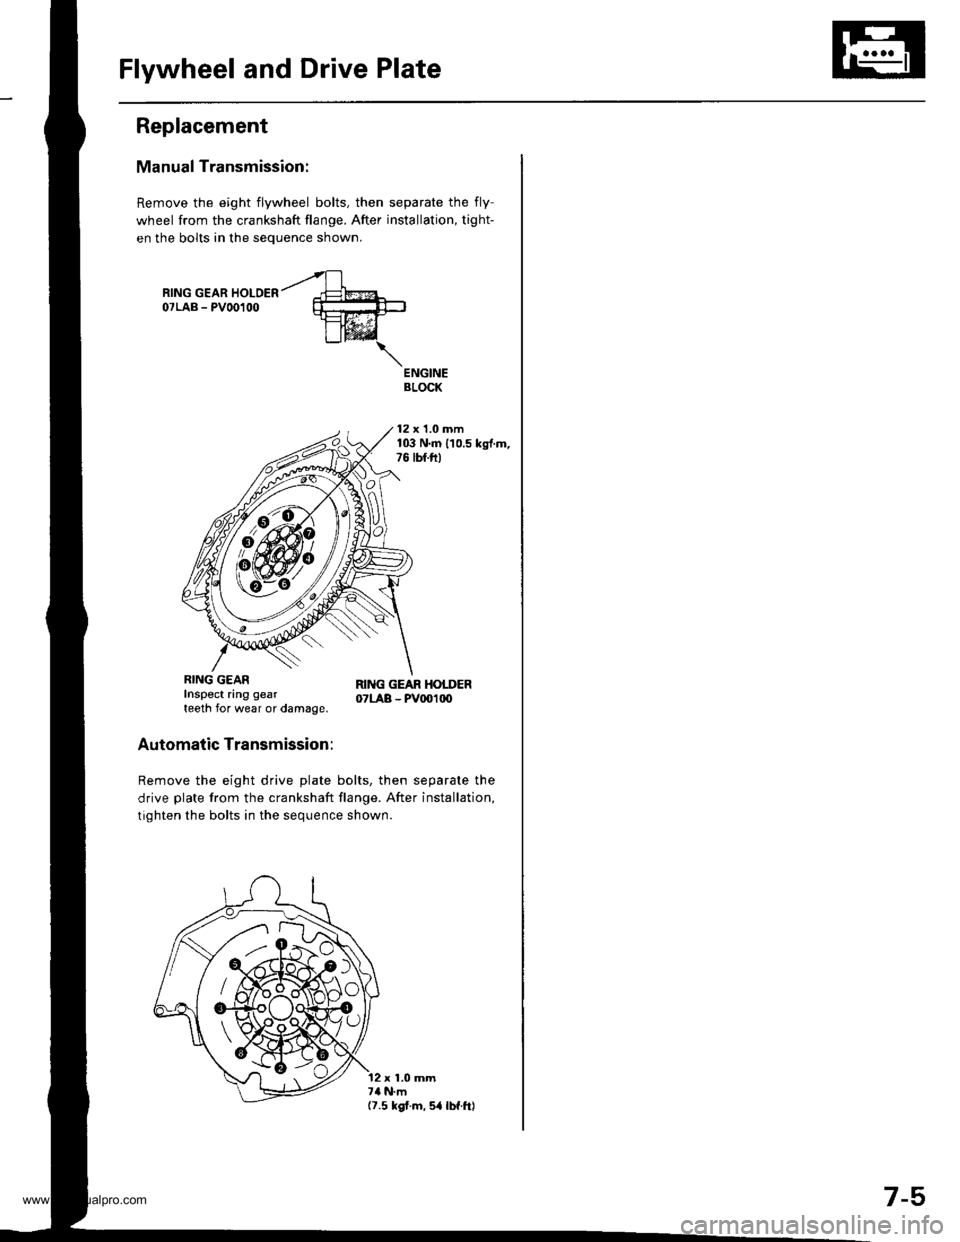 HONDA CR-V 1997 RD1-RD3 / 1.G Owners Manual 
Flywheel and Drive Plate
Replacement
Manual Transmission:
Remove the eight flywheel bolts, then separate the fly-
wheel from the crankshaft flange. After installation, tight-
en the bolts in the sequ